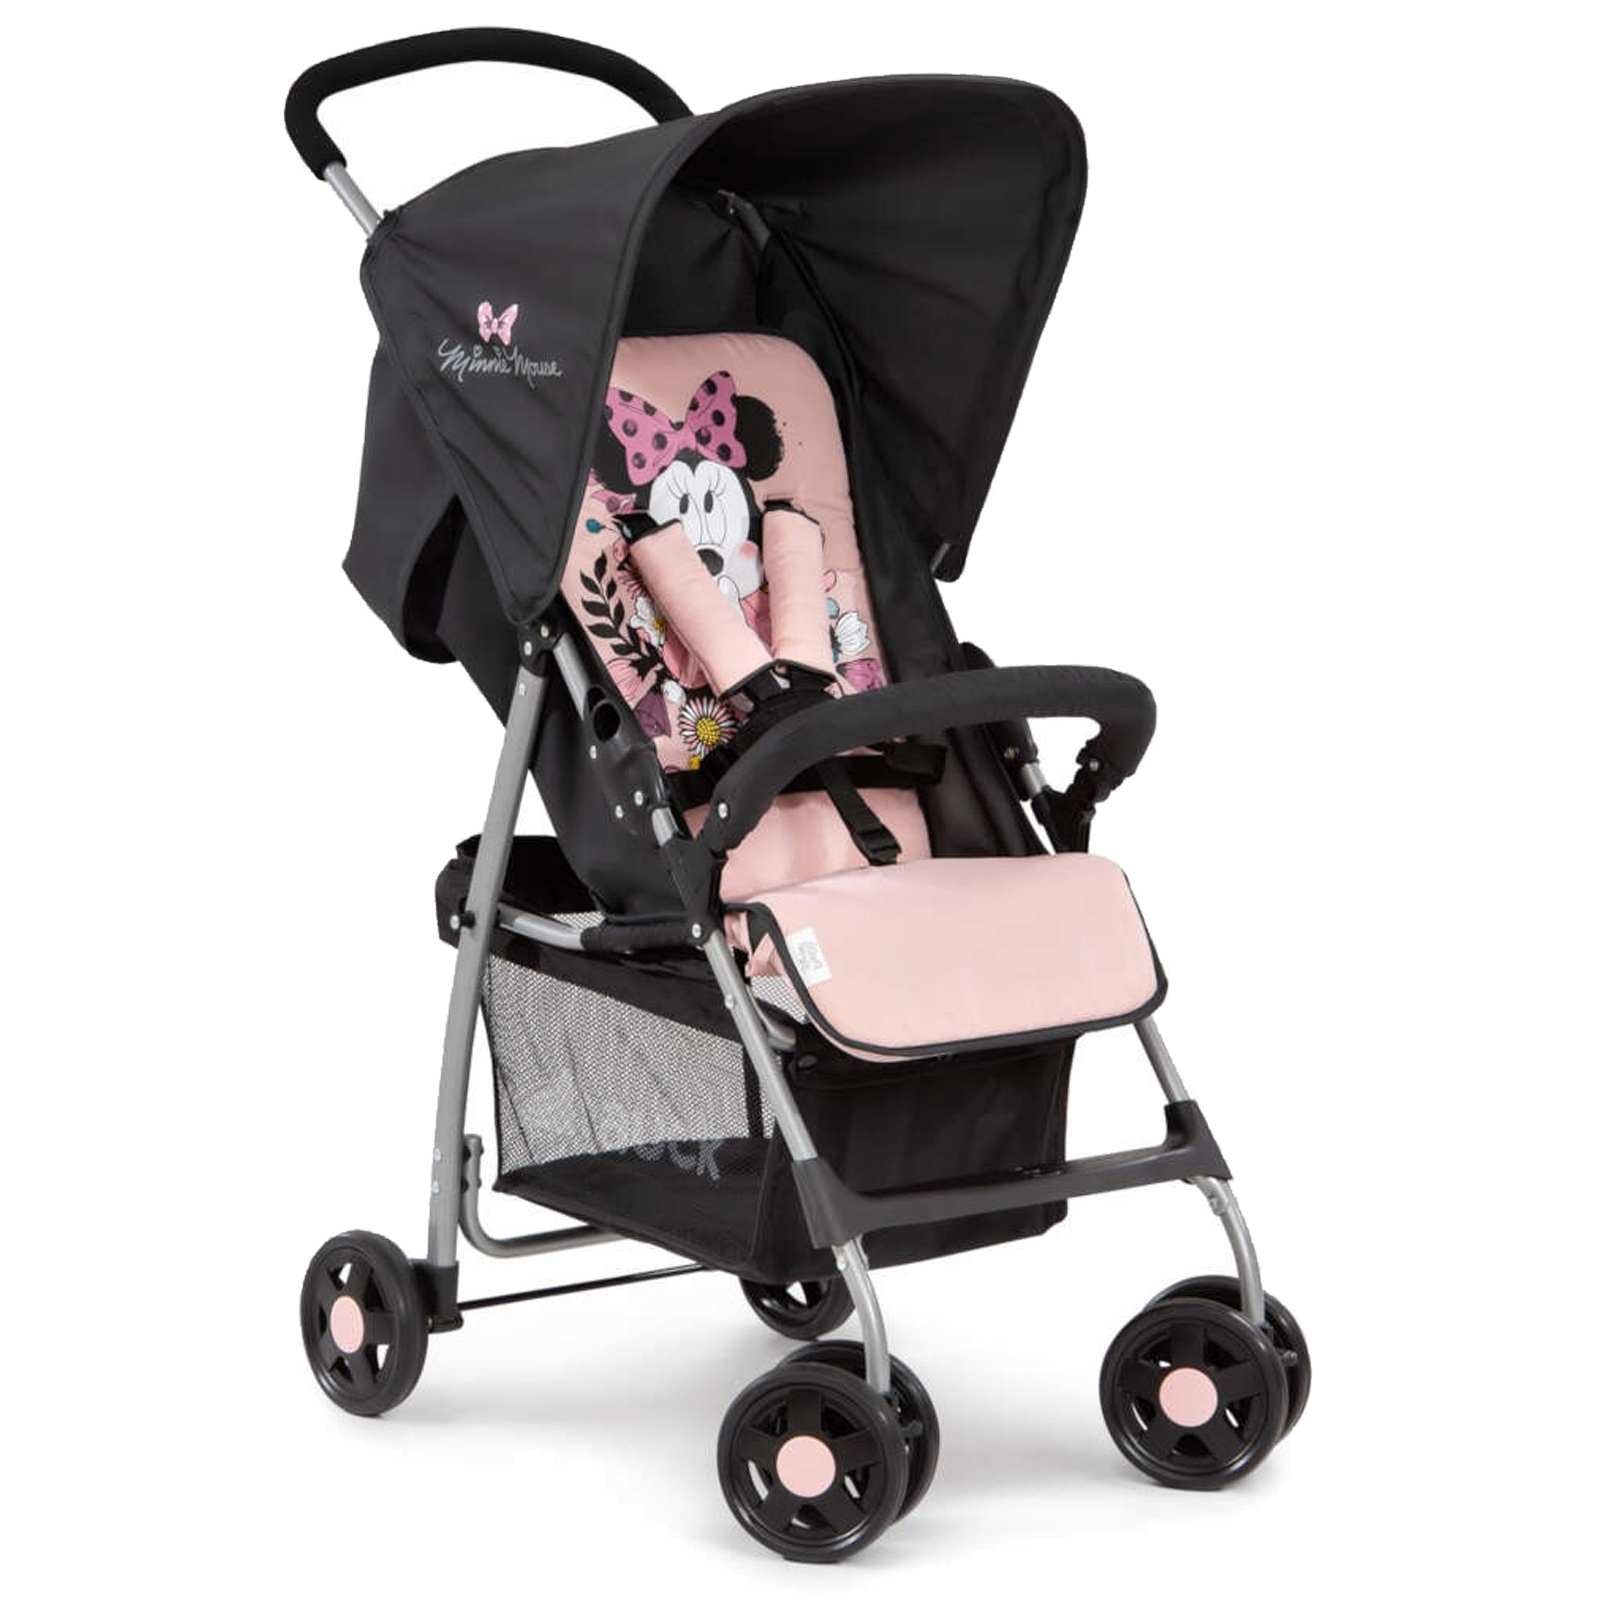 hauck mickey mouse stroller